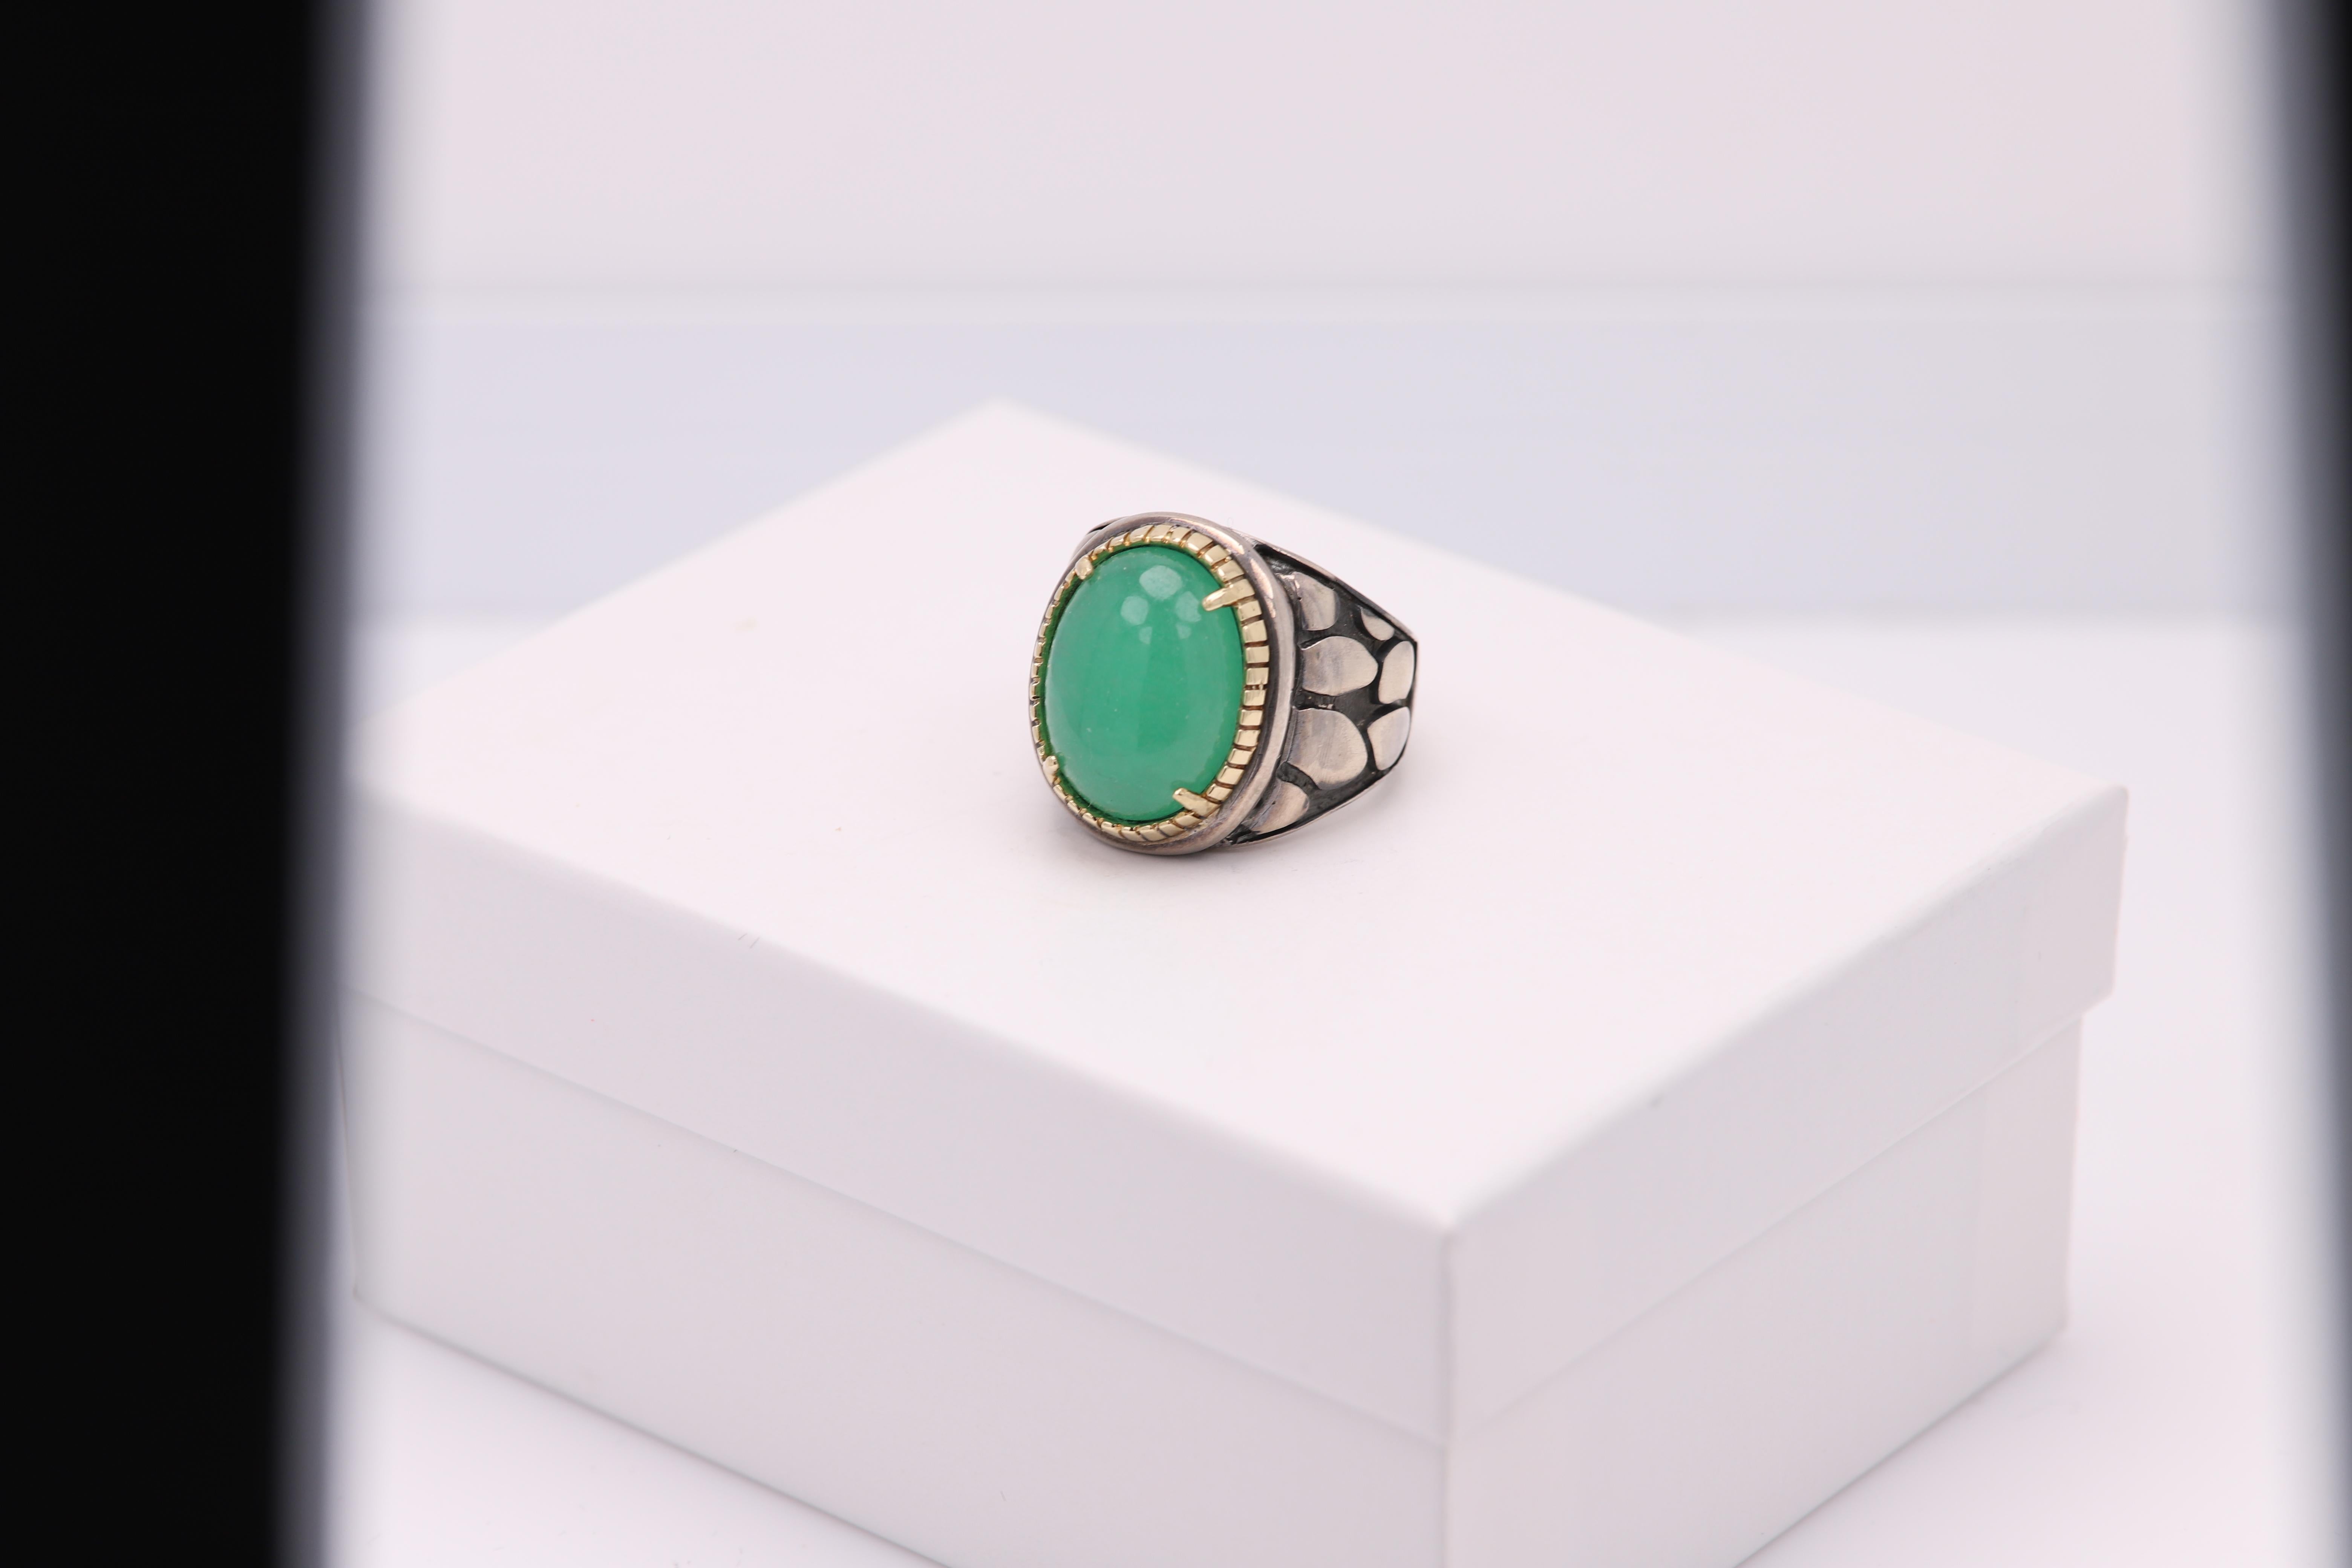 Vintage Ring with a Brilliant Treated Jade stone
Cabochon cut.
The stone is natural but treated with color(it is and was common to do so)
Approx size 16 x 12 mm
Mostly Sterling Silver 925 and the bezel is solid 18k yellow gold.
Well craftsmanship -